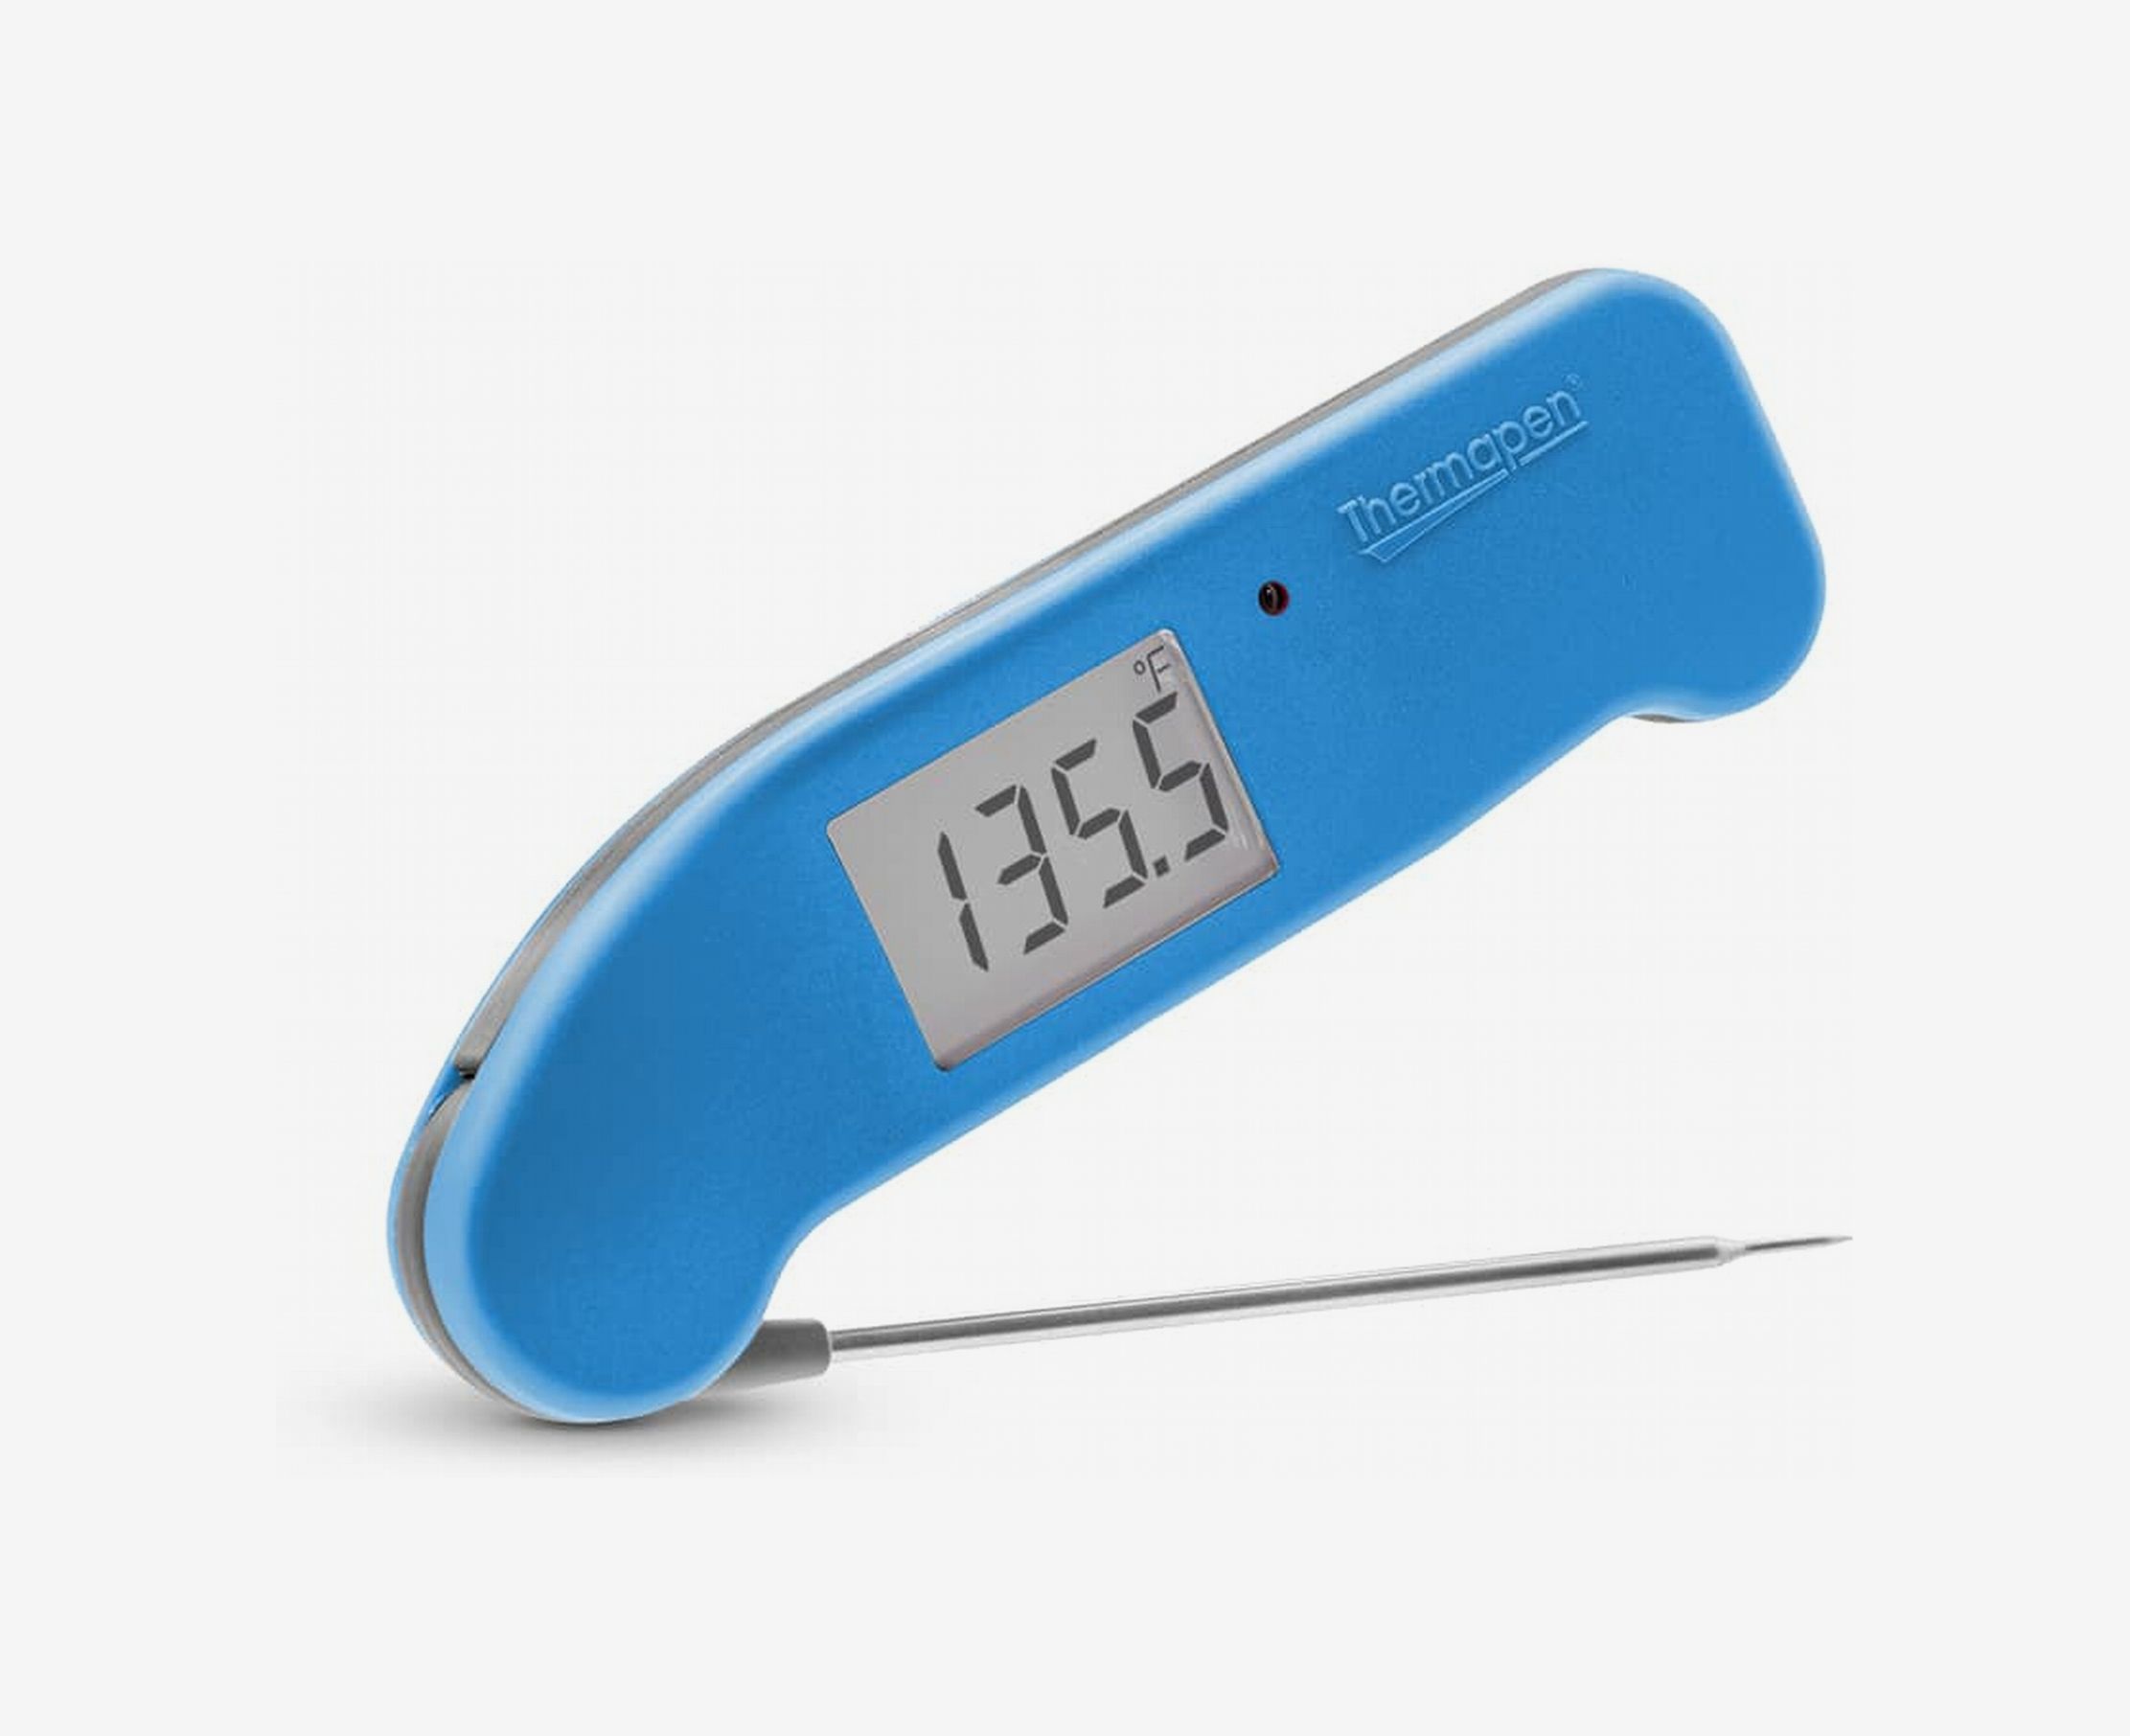 The Best Meat Thermometers 2018: Thermapen, Etekcity & More